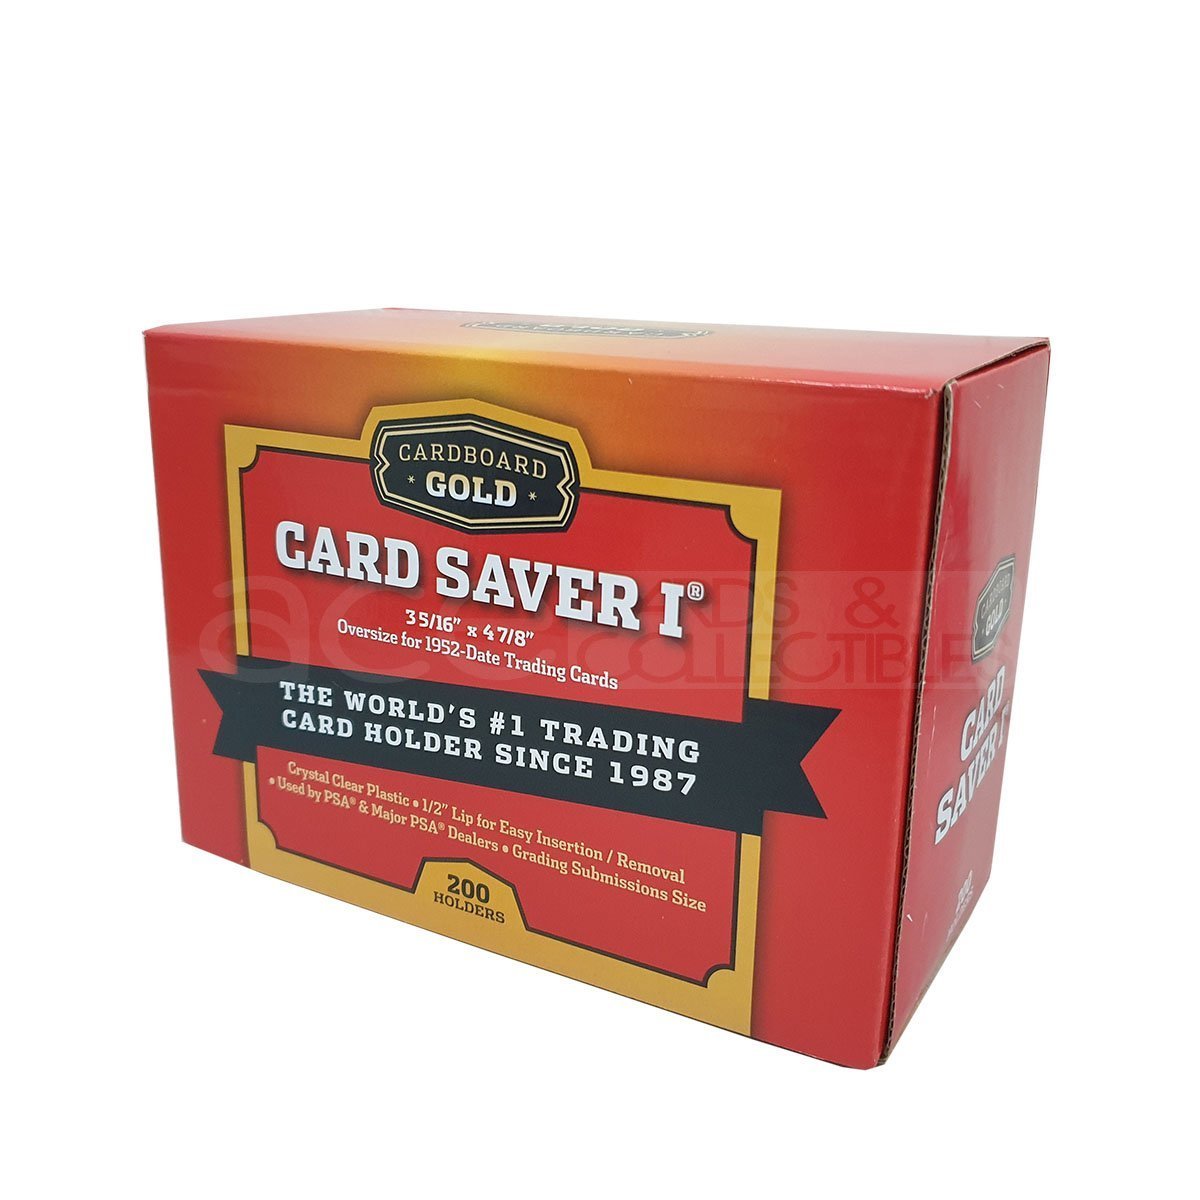 Cardboard Gold &quot;Card Saver 1&quot; Semi-Rigid Card Holder (3 5/16&quot; x 4 7/8&quot;)-Whole Box (Clear 200pcs)-Cardboard Gold-Ace Cards &amp; Collectibles